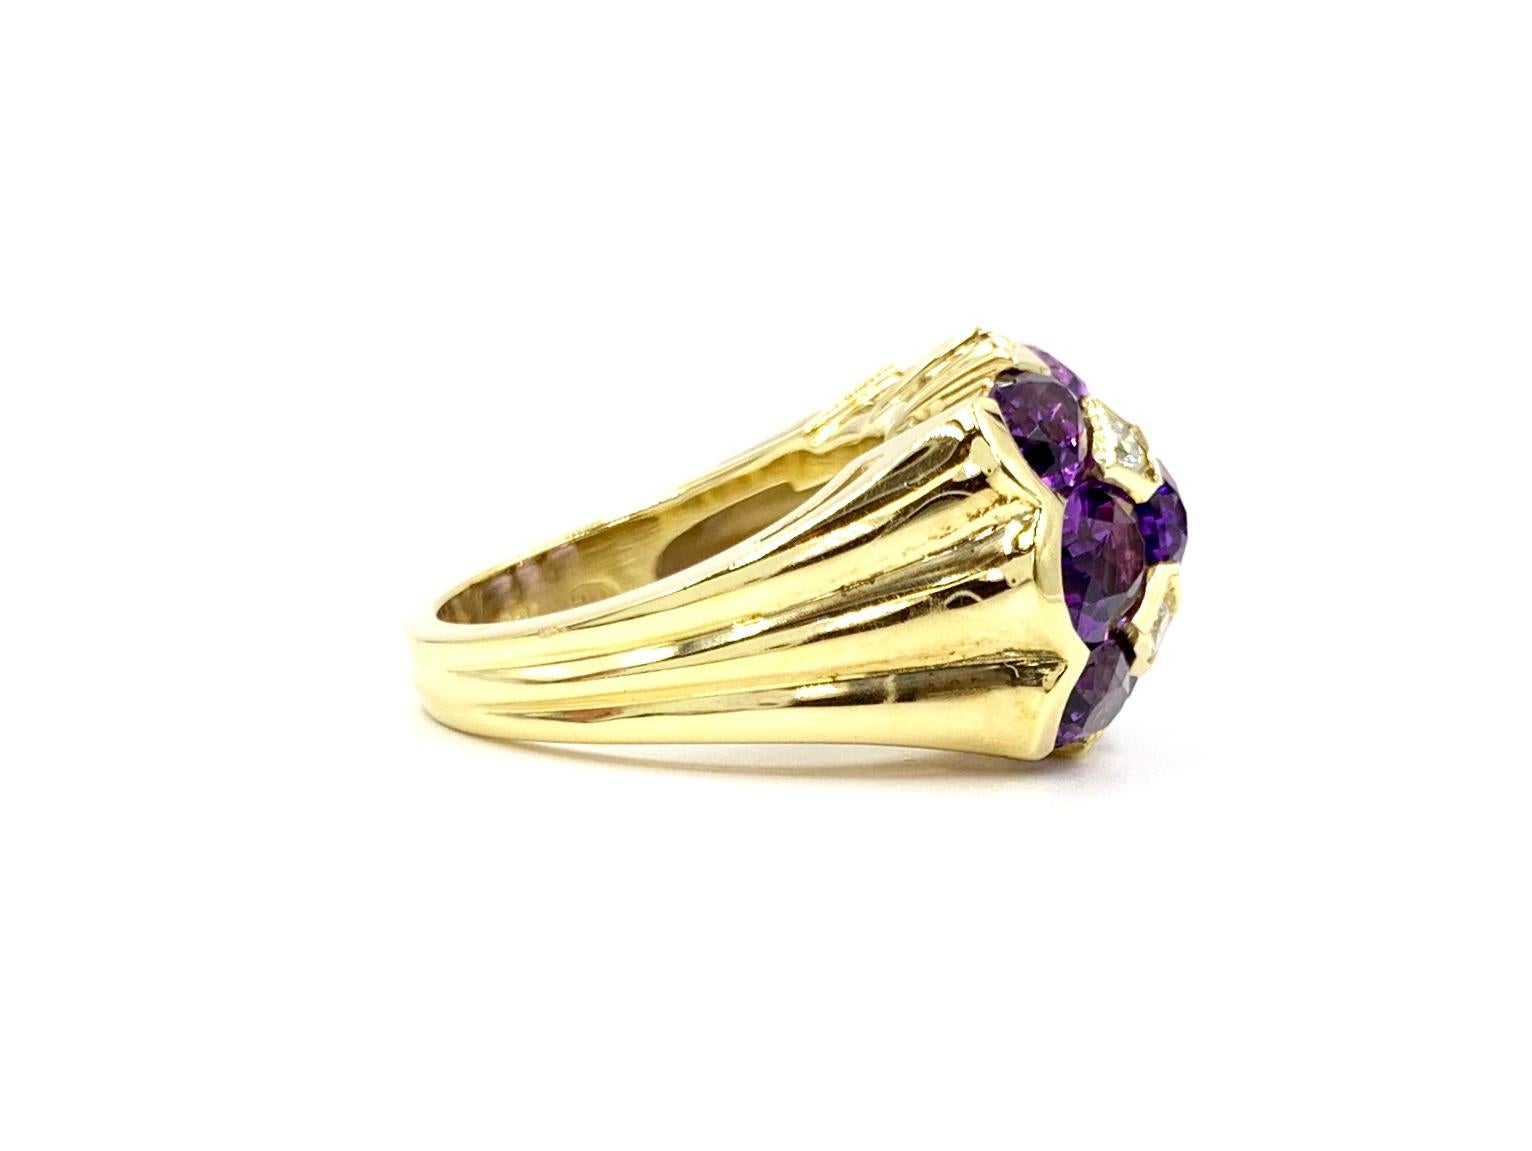 A substantial and well made 18 karat yellow gold dome ring featuring nine beautifully faceted oval amethysts and four round brilliant diamonds. Approximate diamond total weight is .28 carats at approximately G color, VS2 clarity. Stones are uniquely